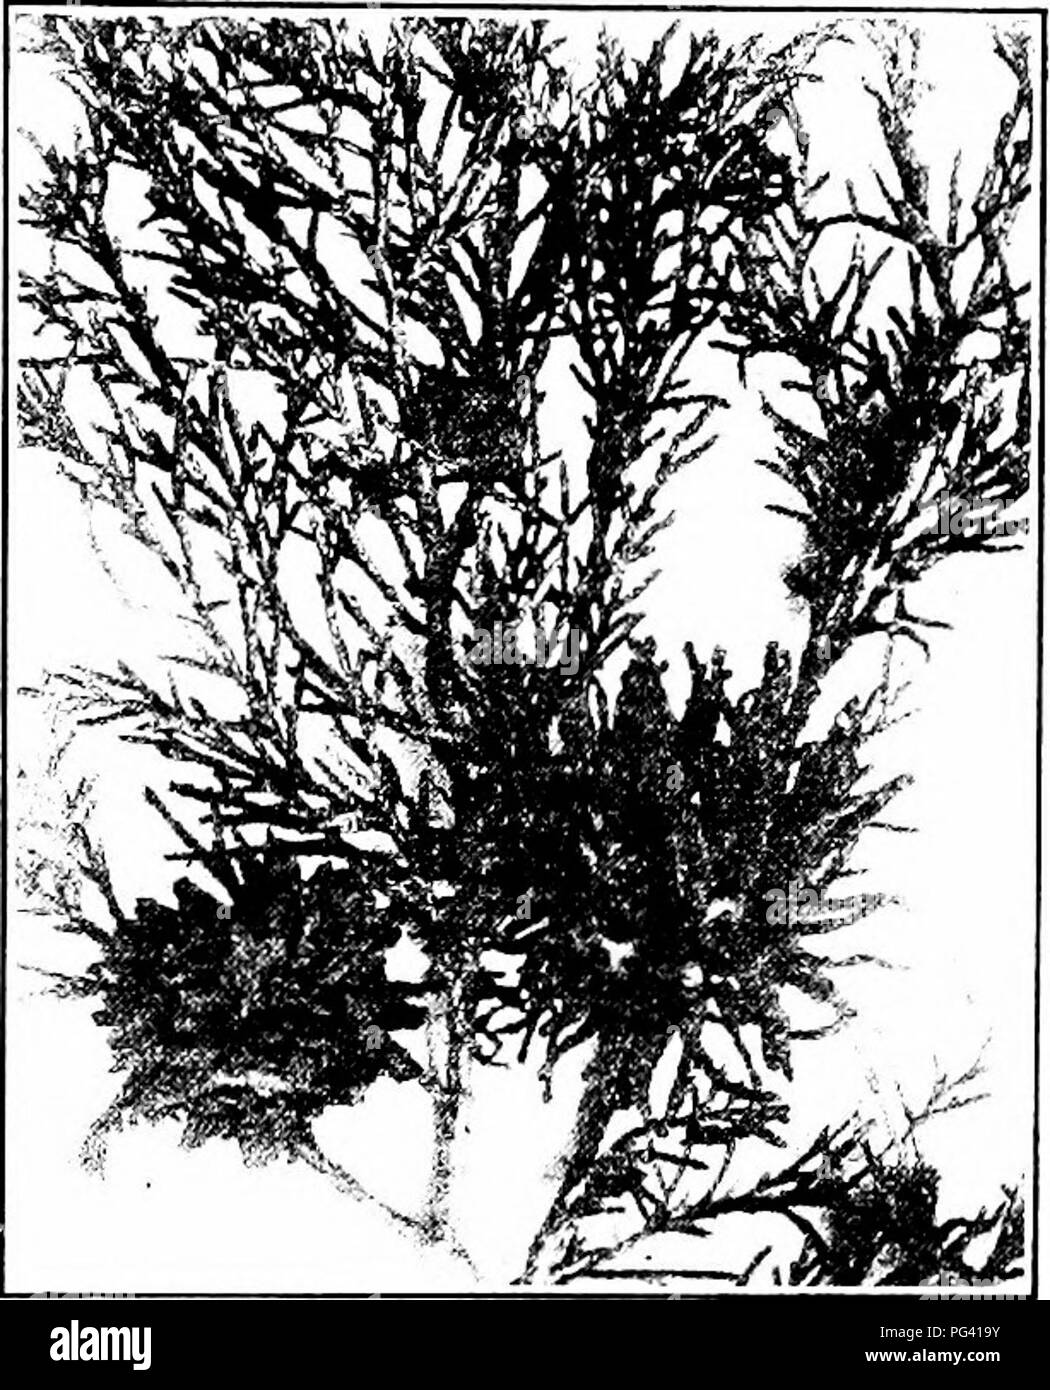 . Manual of fruit diseases . Fruit. APPLE DISEASES 67 found on the ^•()0(ly parts of the apple, and then only on very siLsceptible varieties. Later in the summer small, greenish, sphcrieal enlargements of the leaf may be observed on the cedar. &quot;W-ry soon these take on their final shape, which in some cases is reniform (Fig. IS). The enlargements or galls con- tinue their growth, becom- ing brown and attaining a diameter of two inches or less by the end of the season. During the late autumn and early spring, these galls, or cedar-apples as they are called, show lunnerous depressions o'er Stock Photo